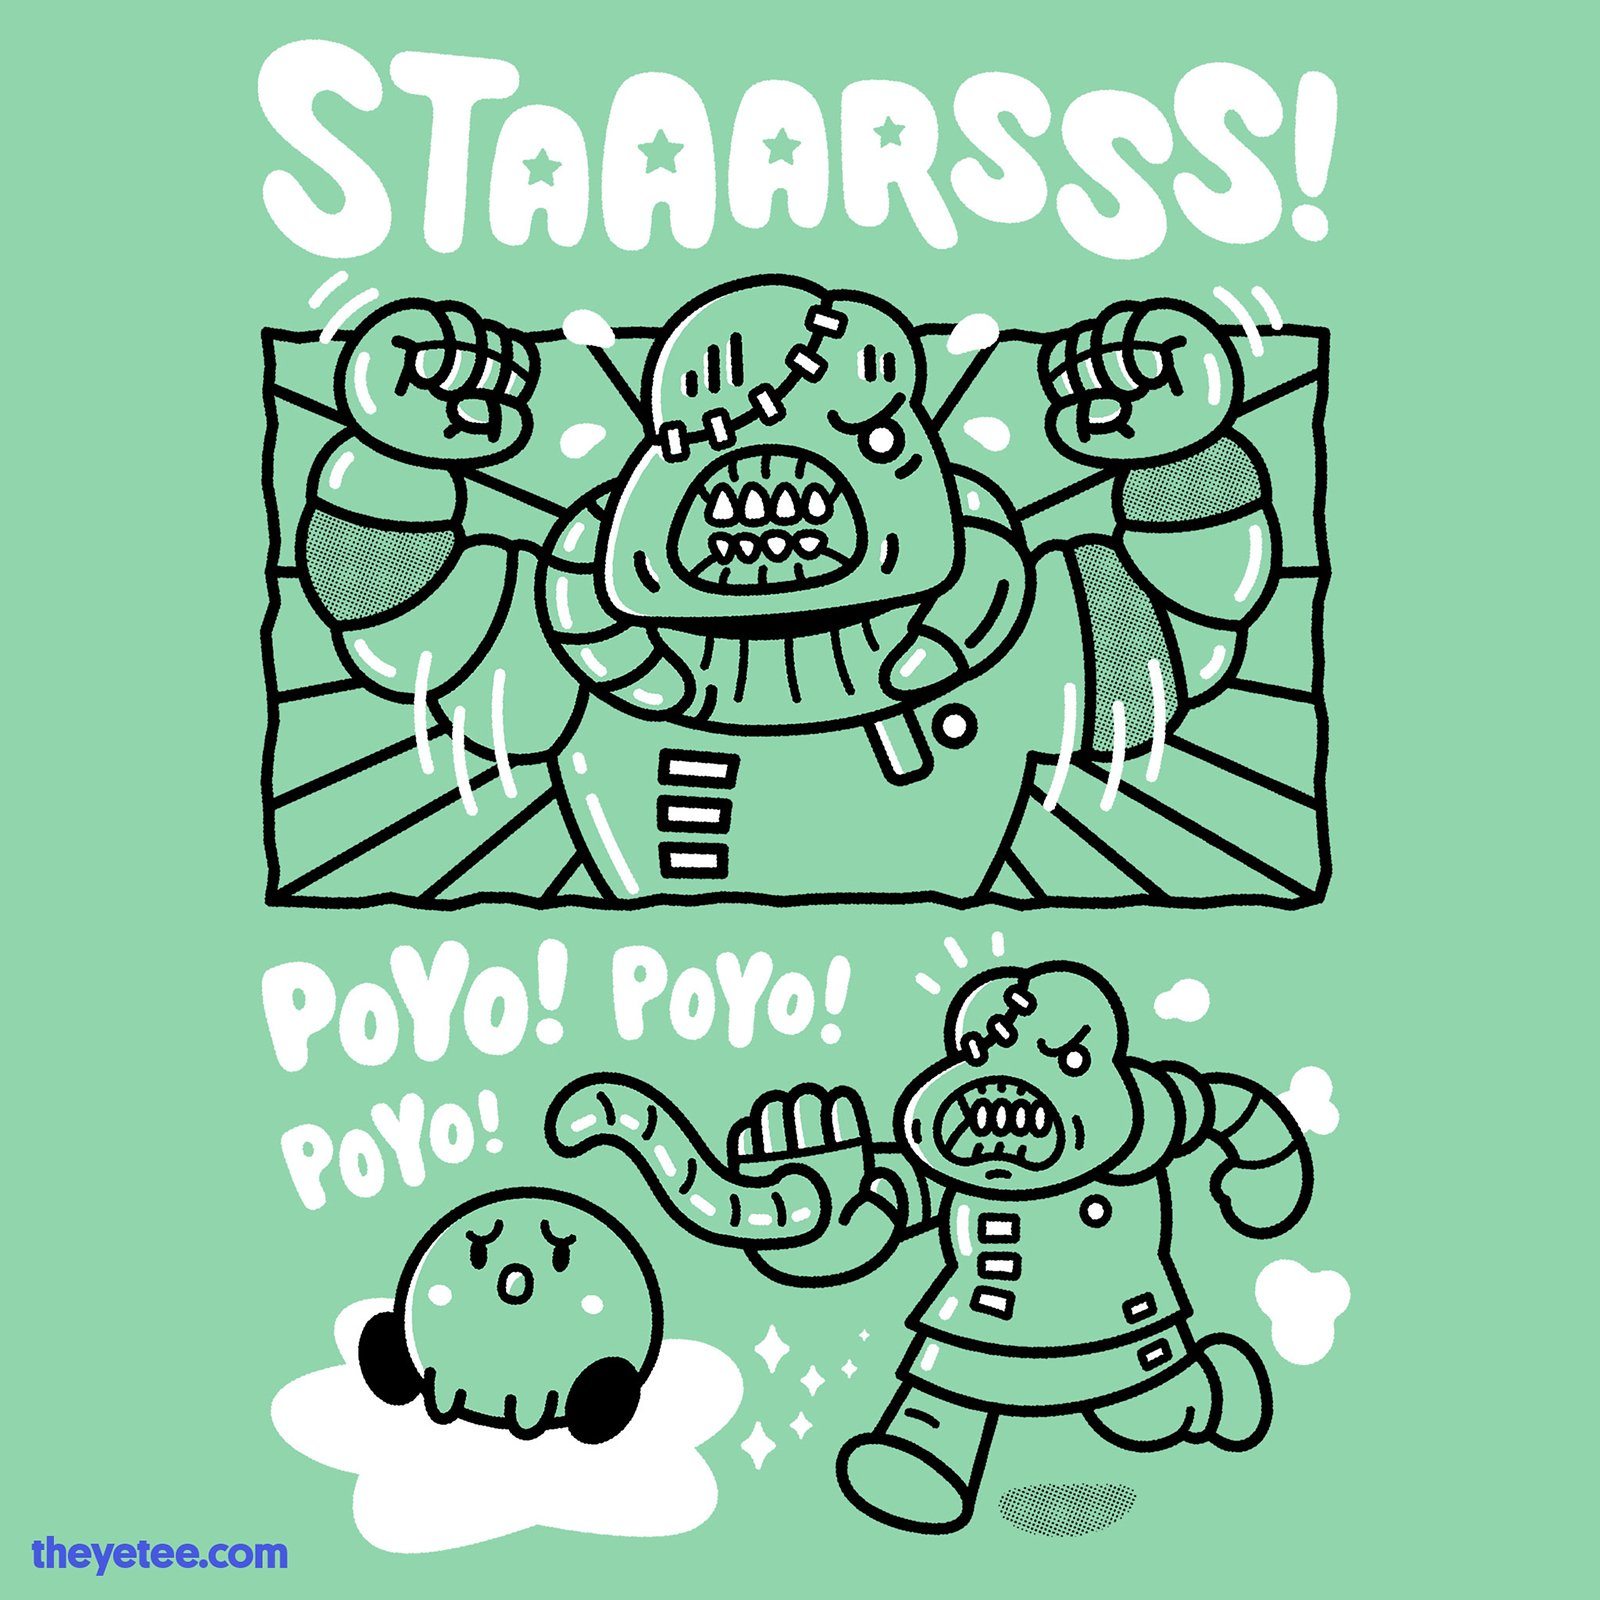 Image of Staaarsss! Green version